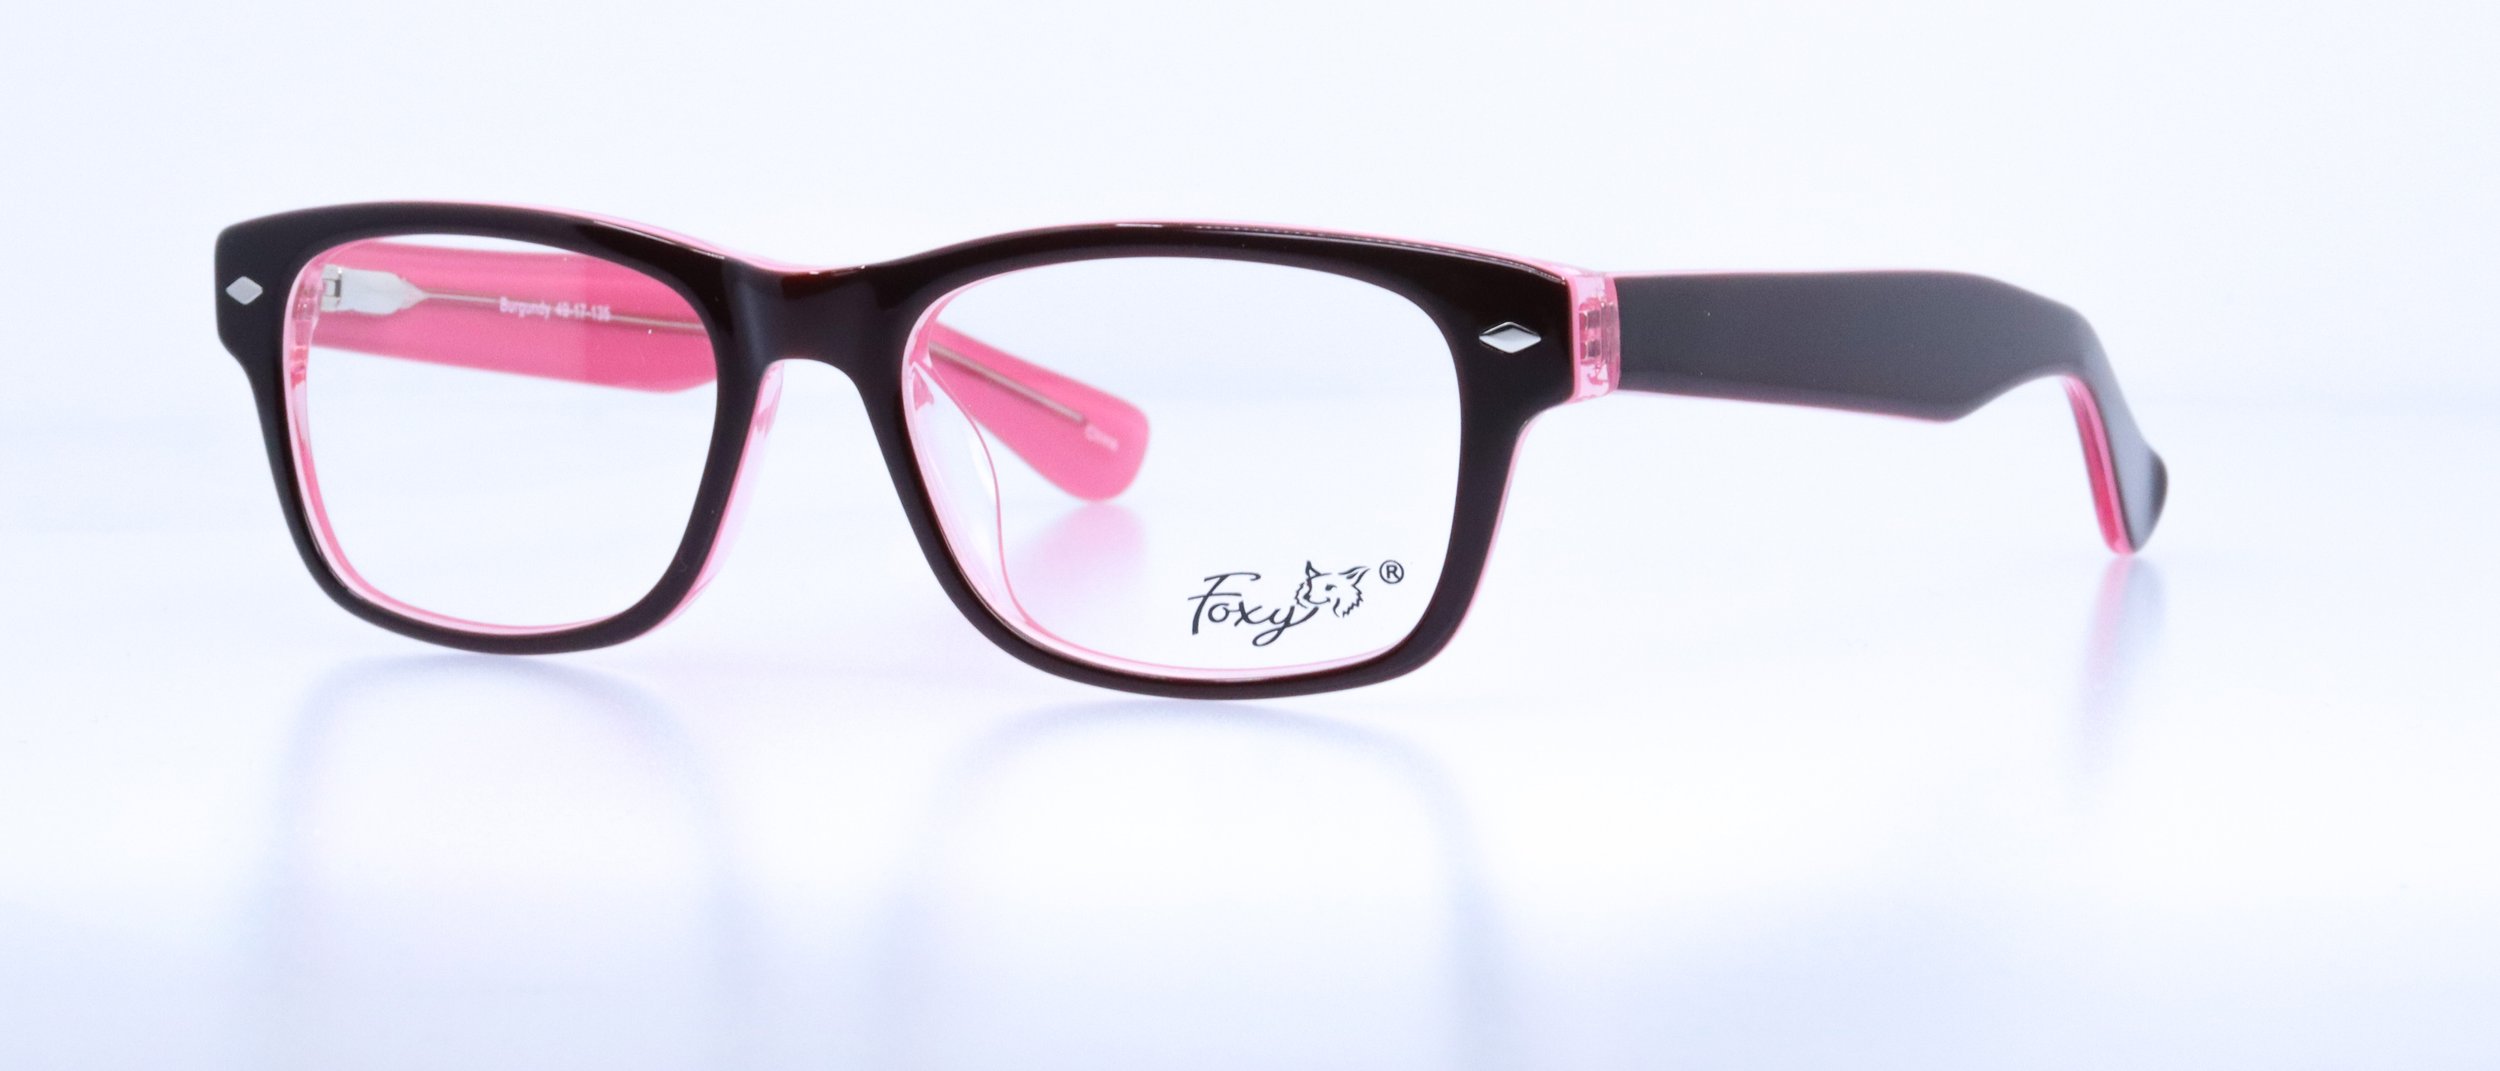  Geekalicious: 49-17-135, Available in Burgundy/Pink, Black, or Brown/Blue 